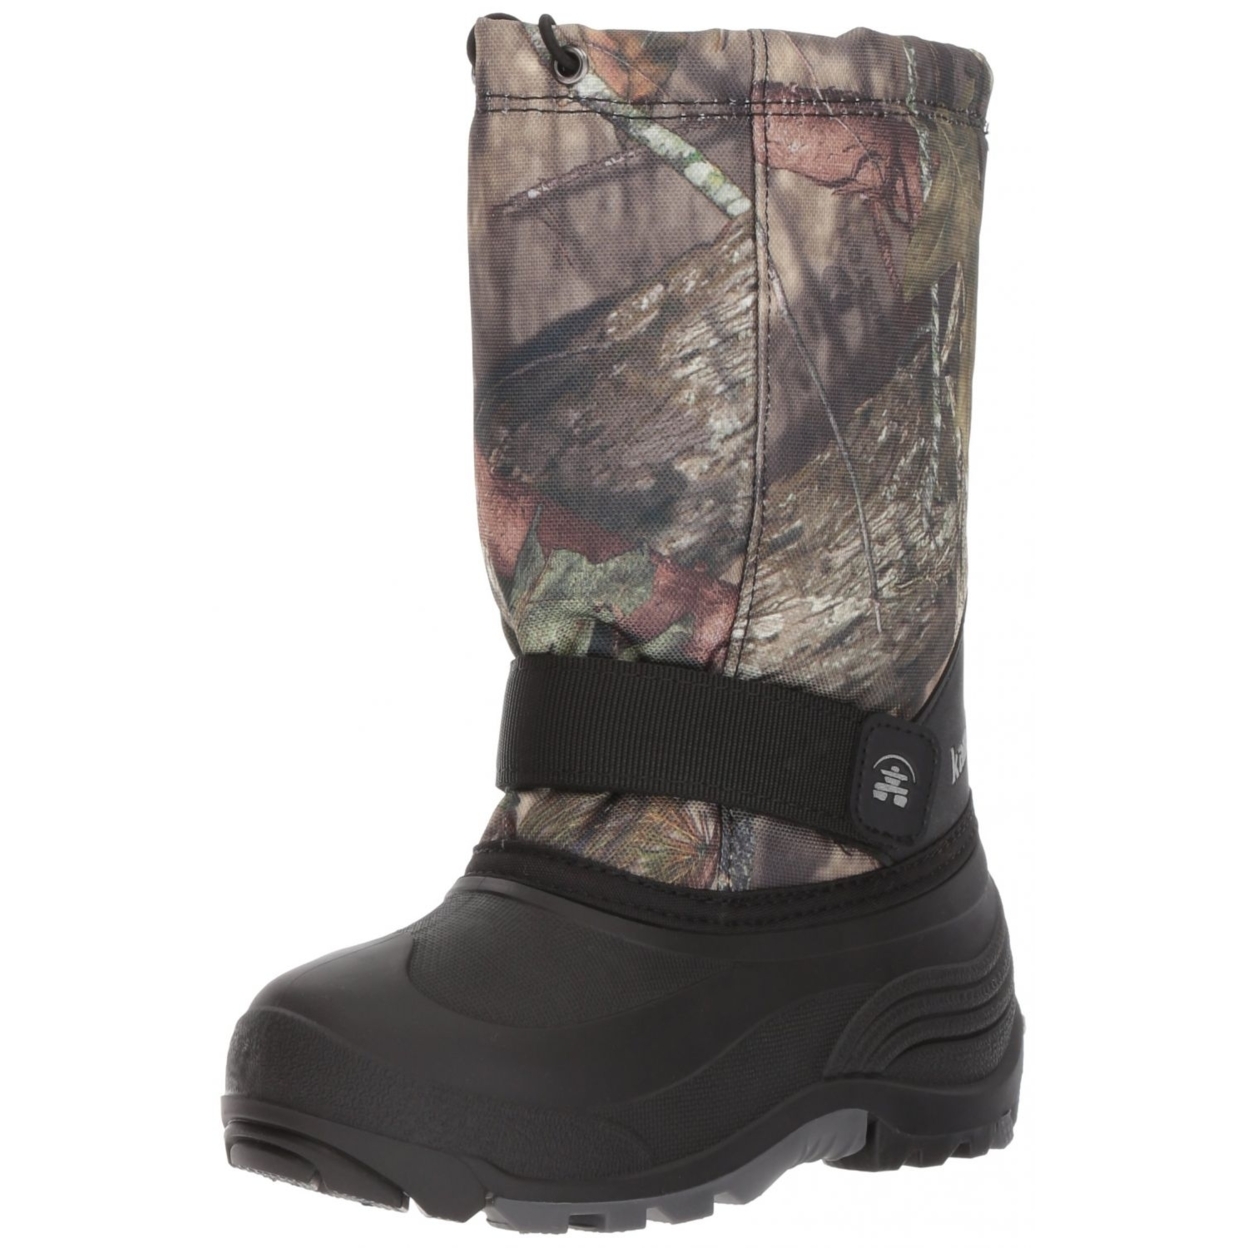 Kamik Rocket Cold Weather Boot (Toddler/Little Kid/Big Kid) 9 Toddler MOSSY OAK COUNTRY CAMO - MOSSY OAK COUNTRY CAMO, 1 Little Kid